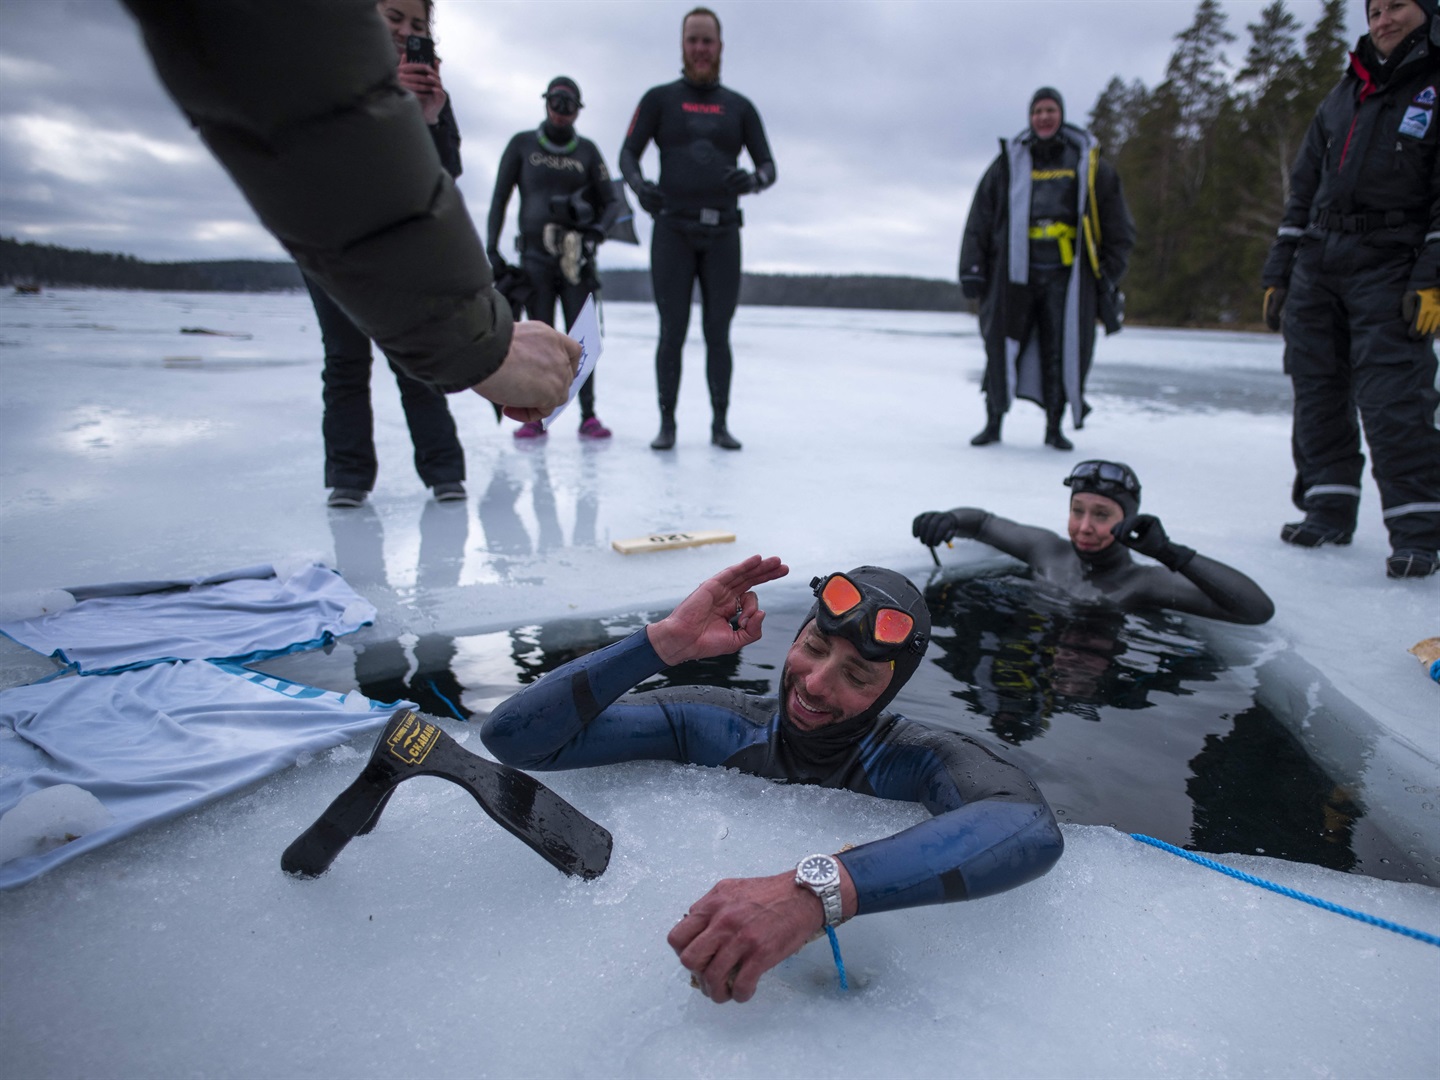 Finnish Freediver Going For Under-Ice World Record | World 